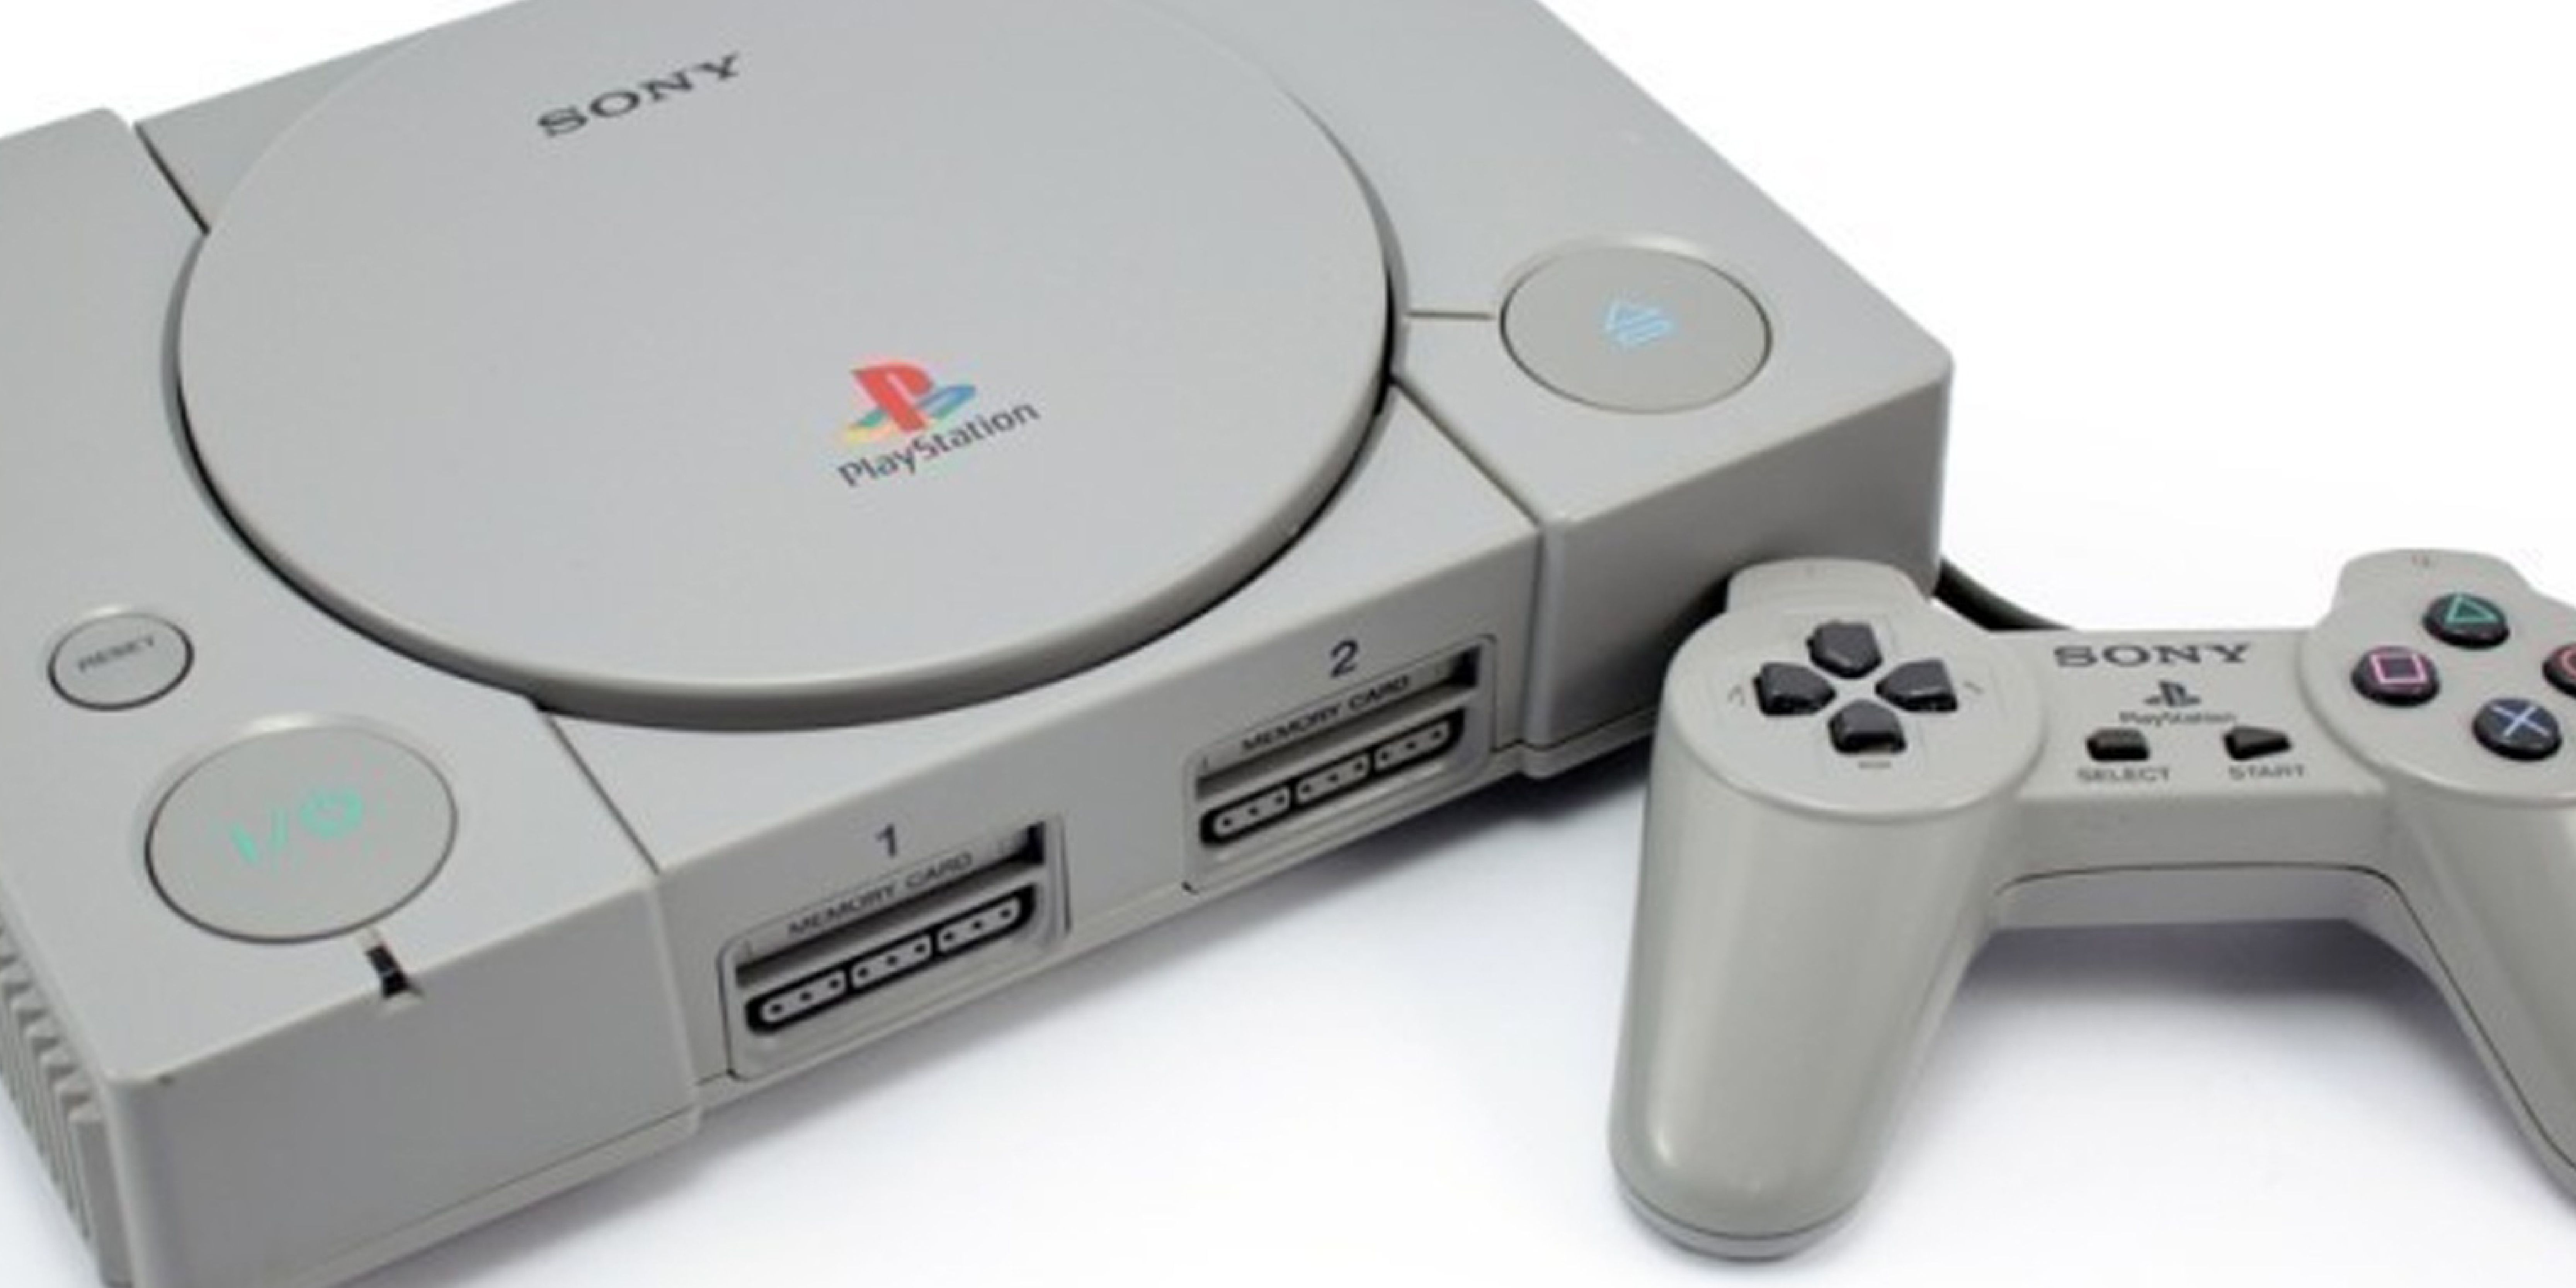 Every PlayStation Console, Ranked By Launch Price